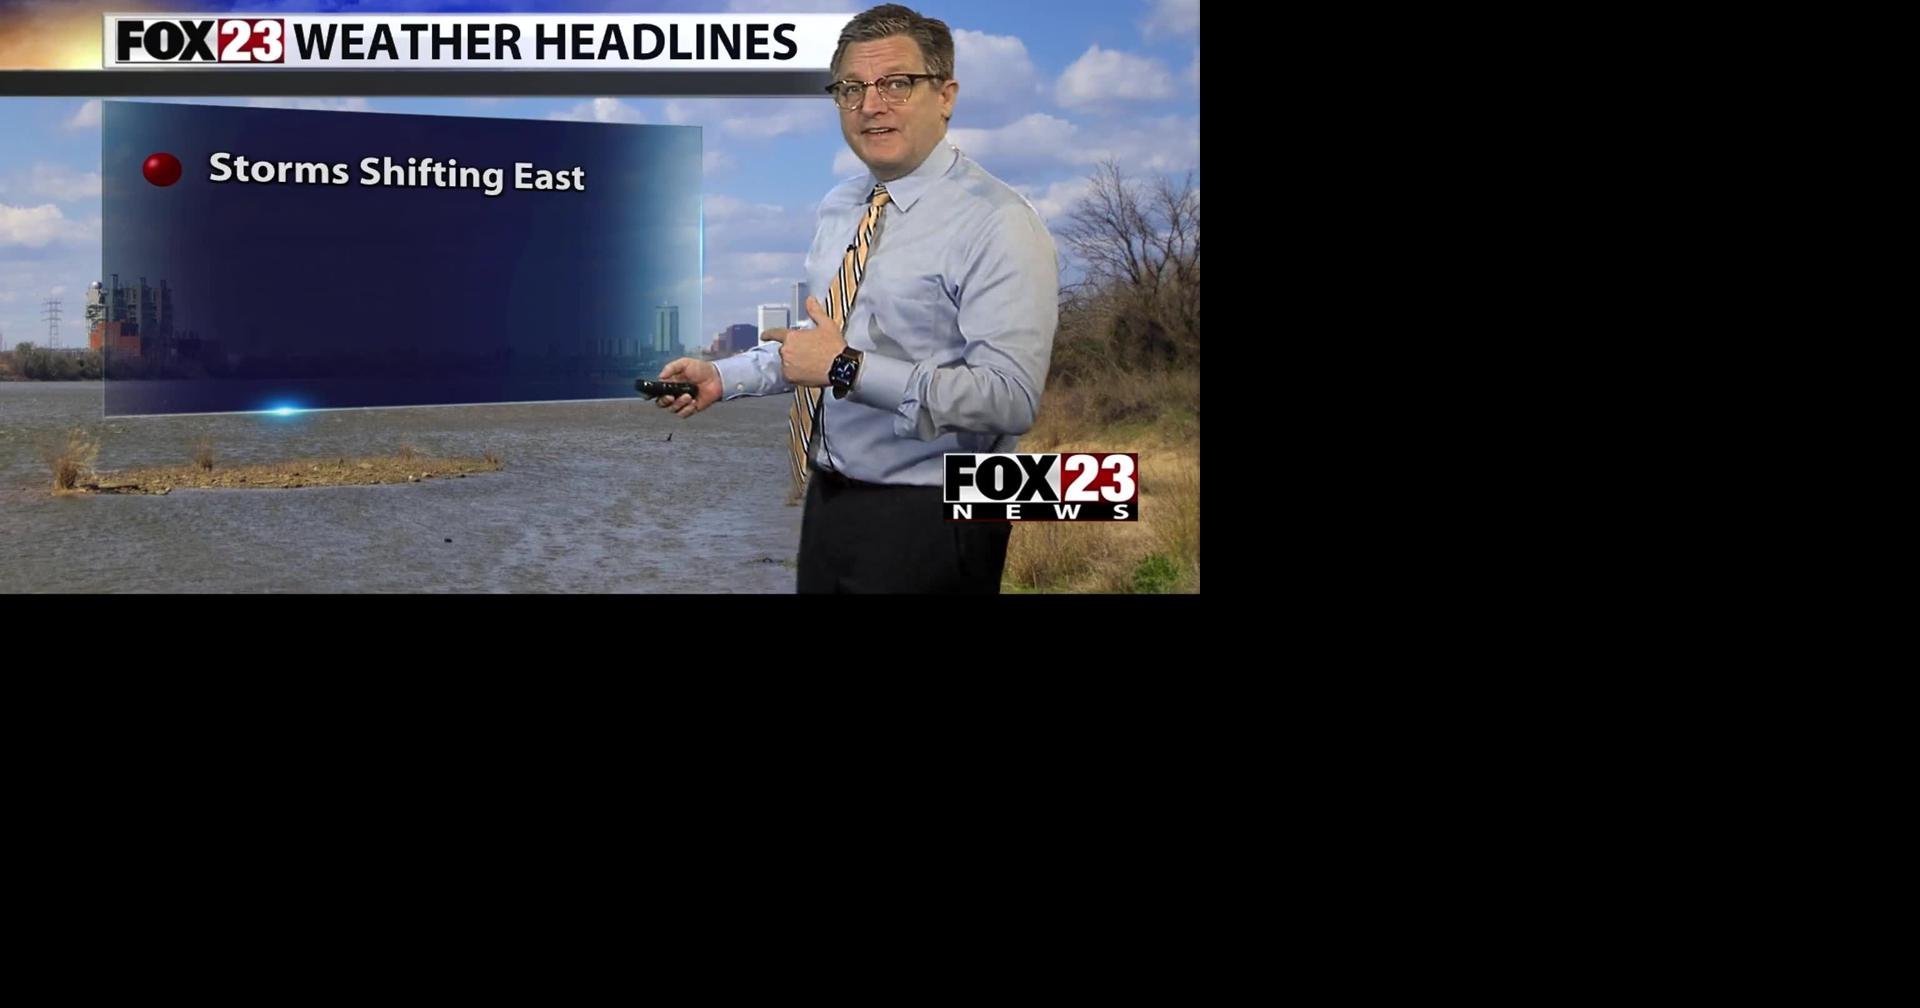 FORECAST Isolated severe storms east of Tulsa this evening Weather